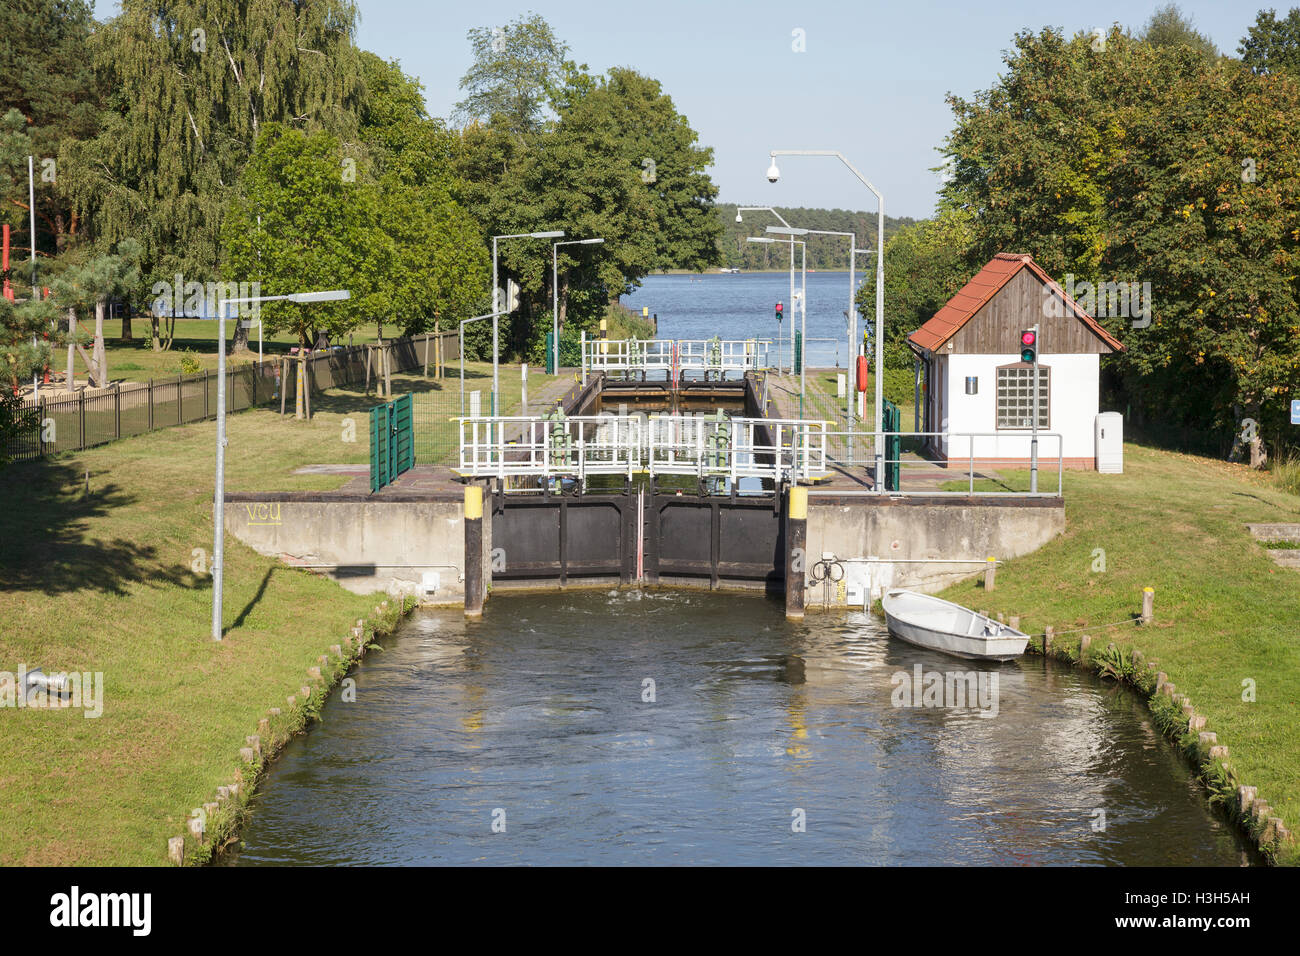 Canal si blocca a Himmelpfort, Brandeburgo, Germania Foto Stock